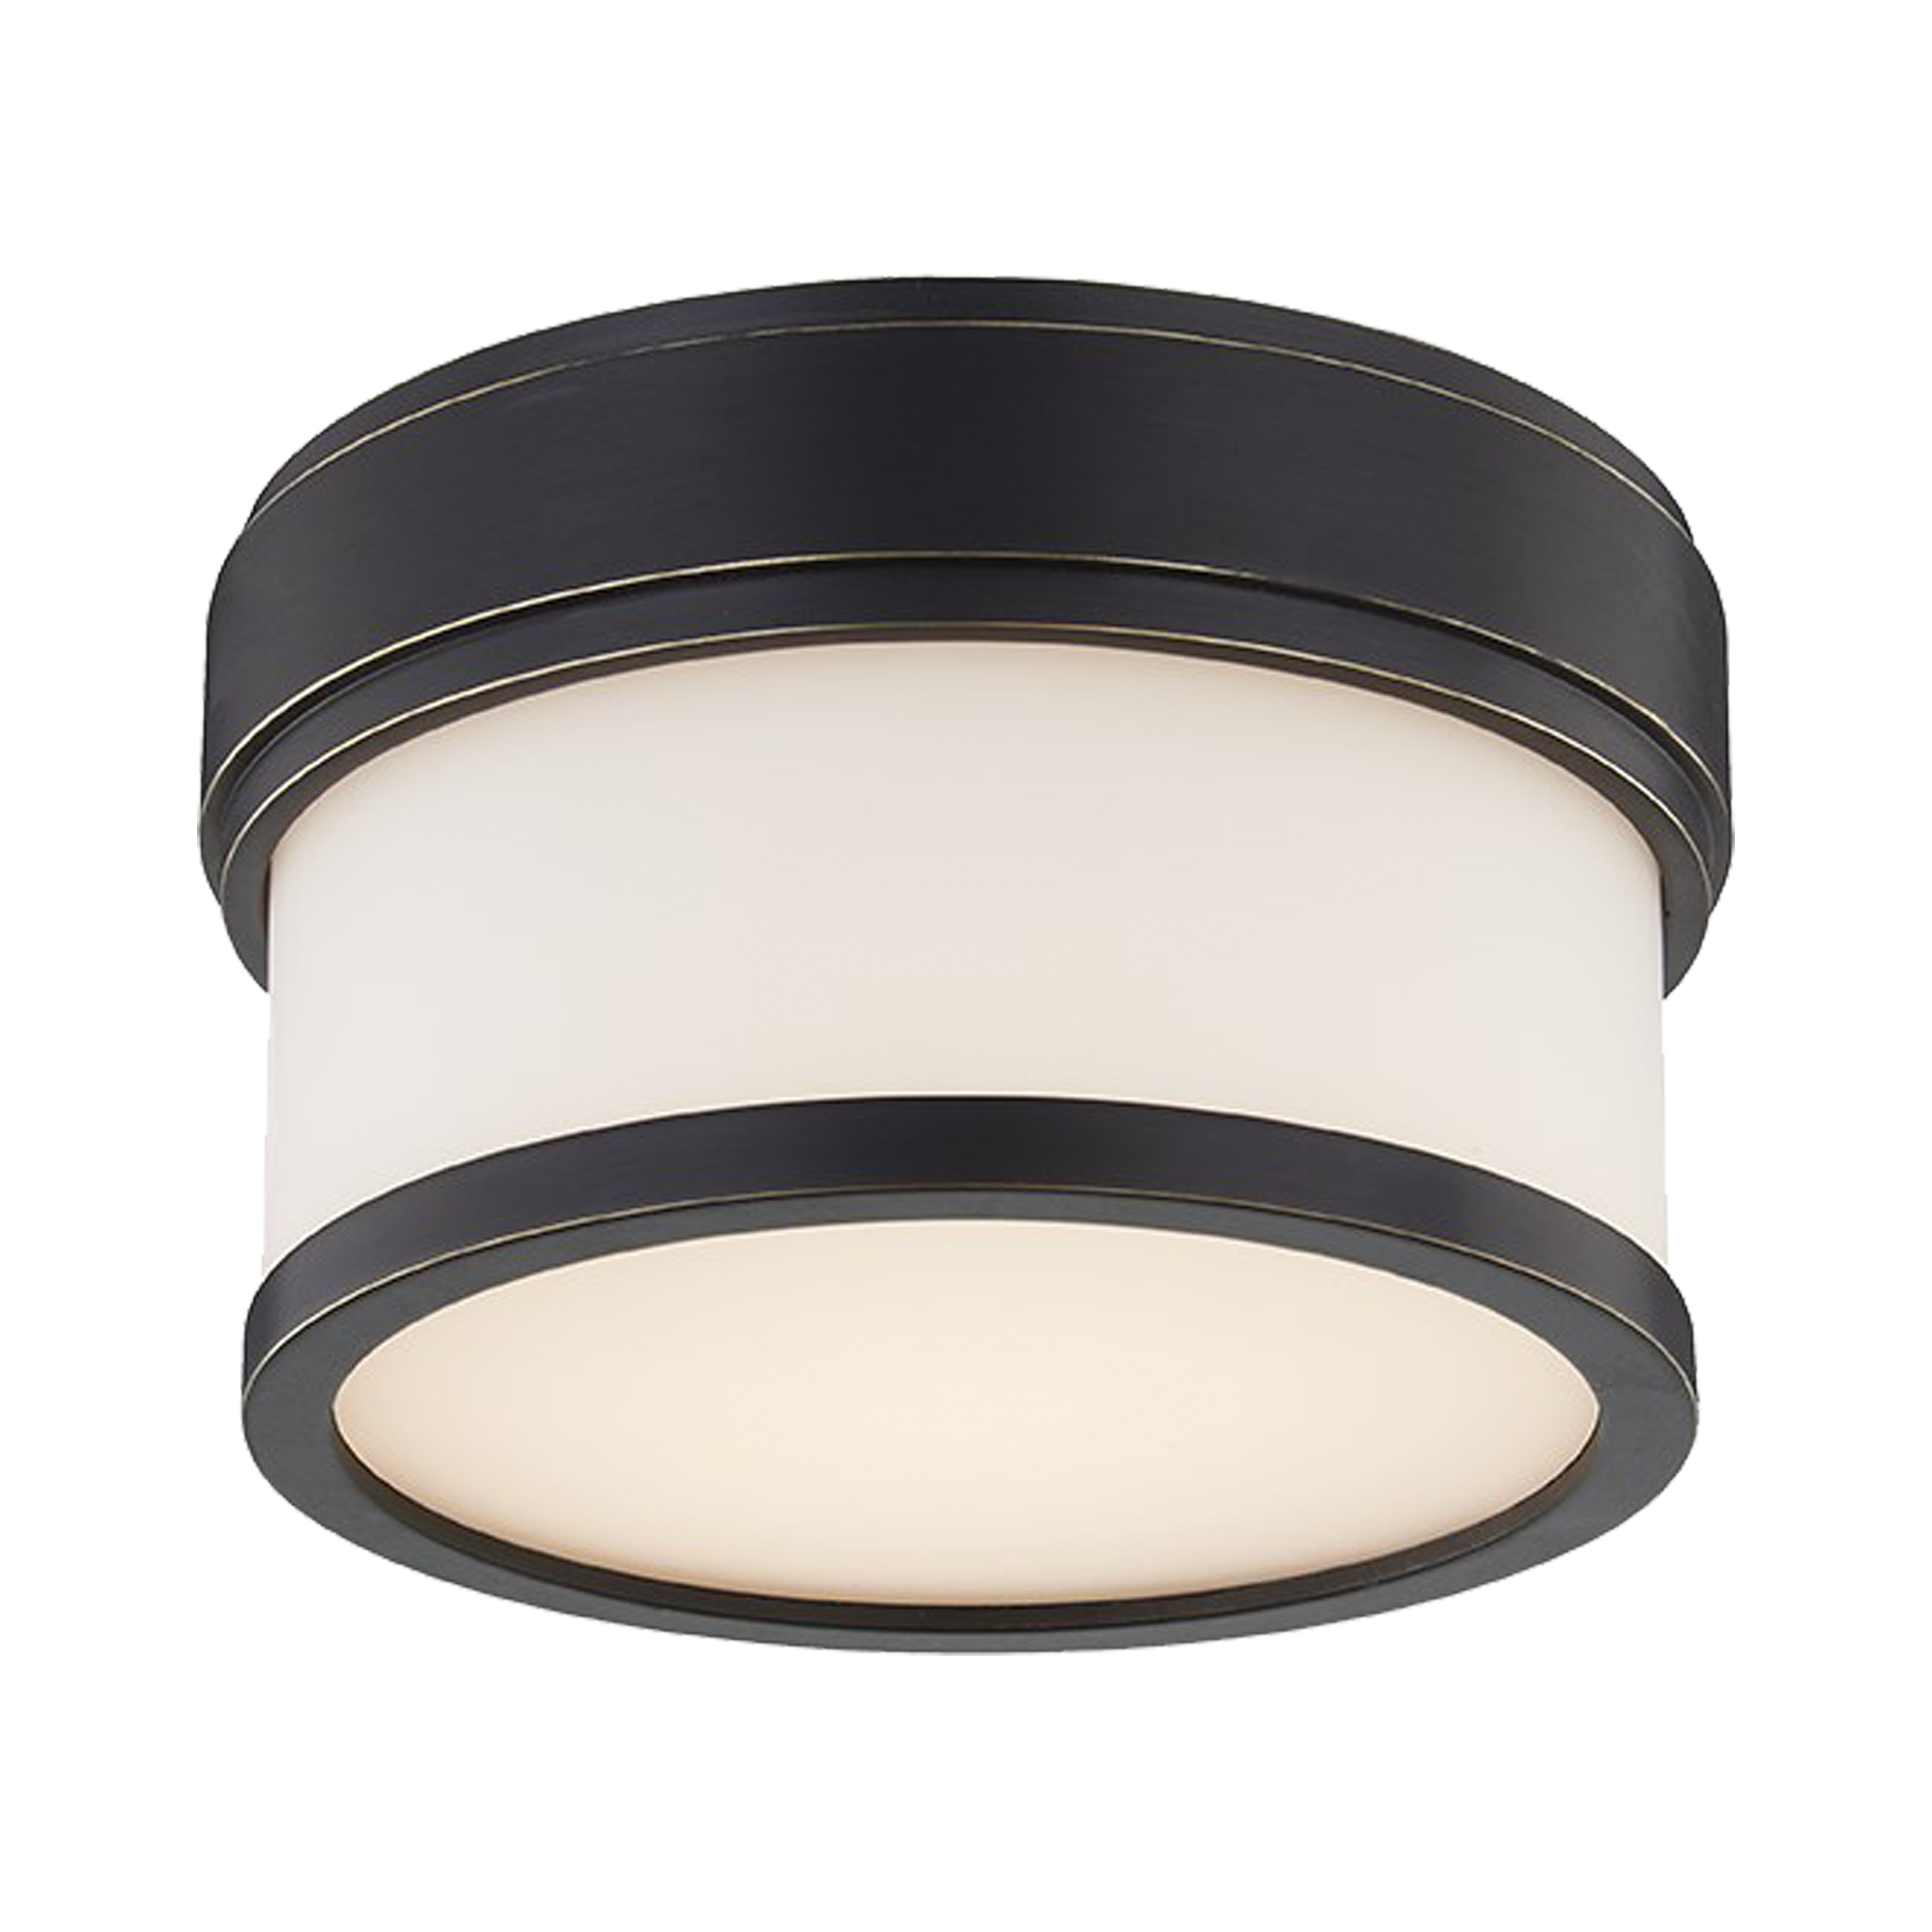 Thick bands along the canopy and the edge of the diffuser create a balanced sense of proportion in this LED flush mount.